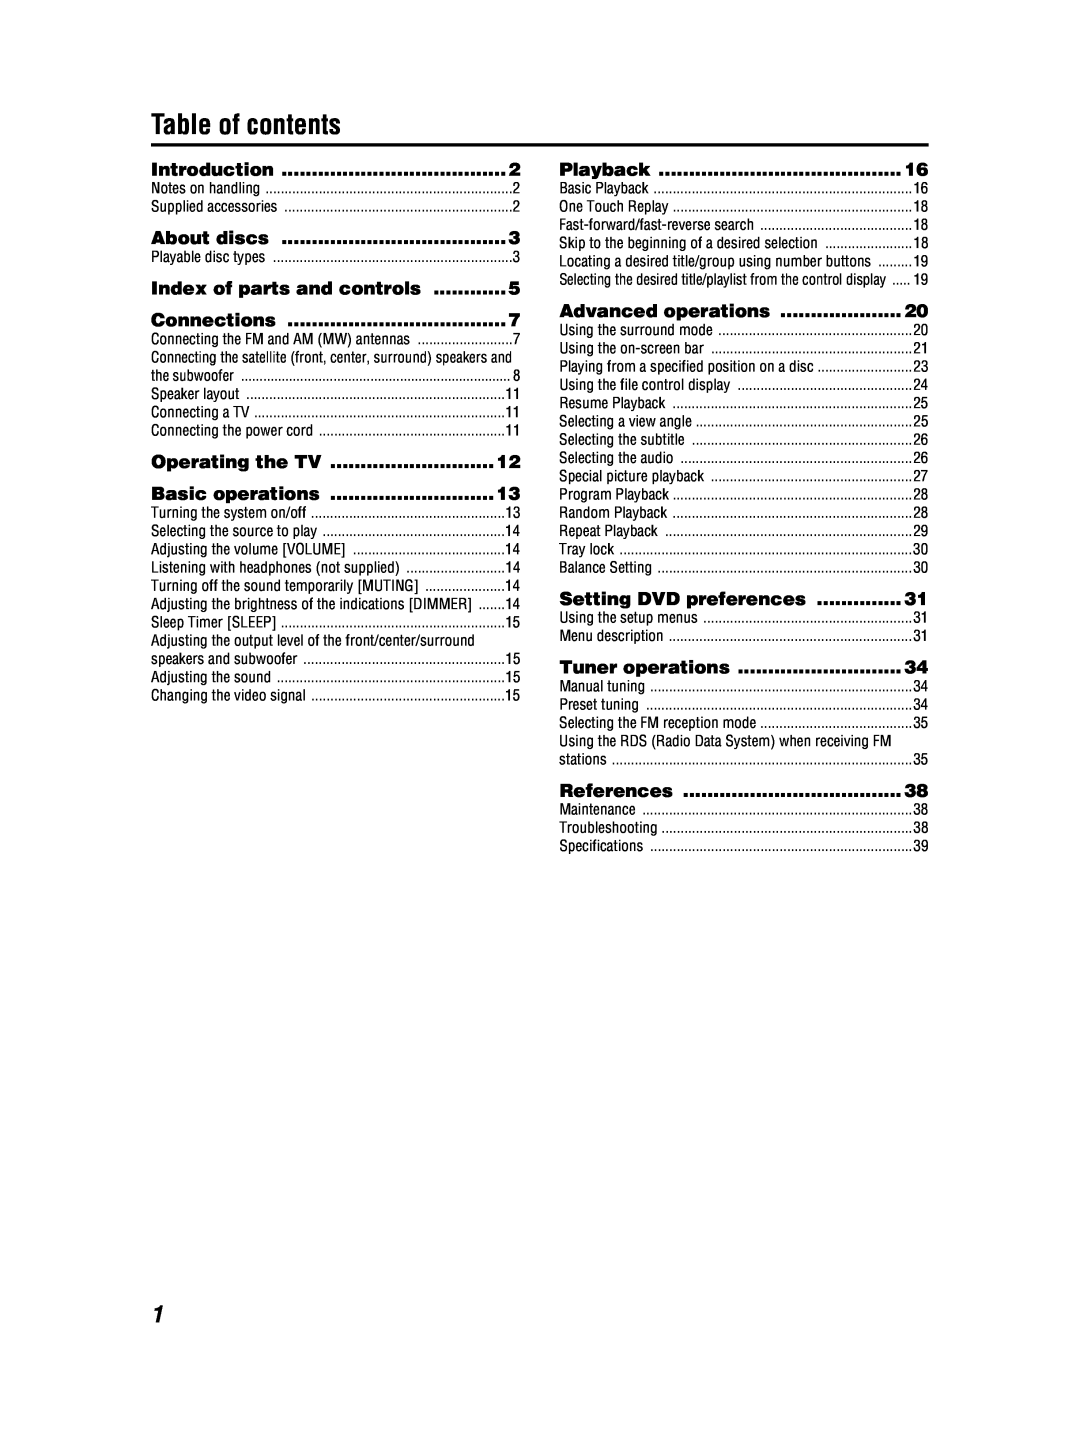 JVC GVT0155-001A Table of contents, Introduction, About discs, Index of parts and controls, Connections, Operating the TV 